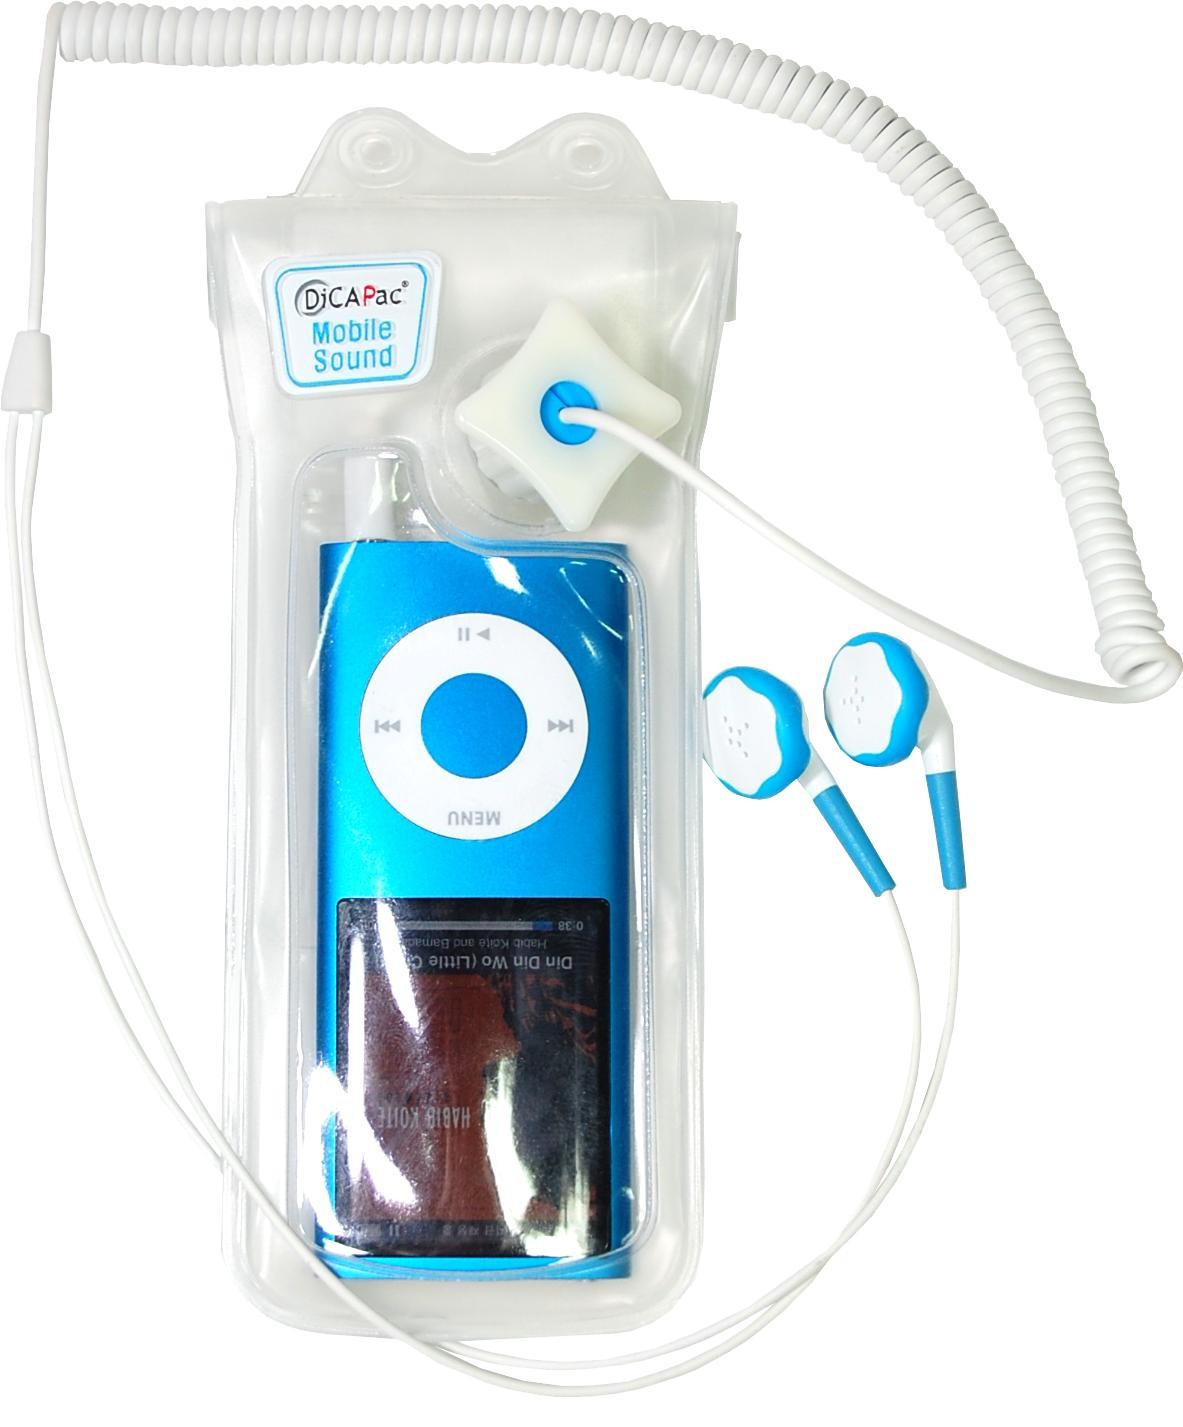  dicapac-wp-ms20-sound-pack-waterproof-case-ipod-nano-31